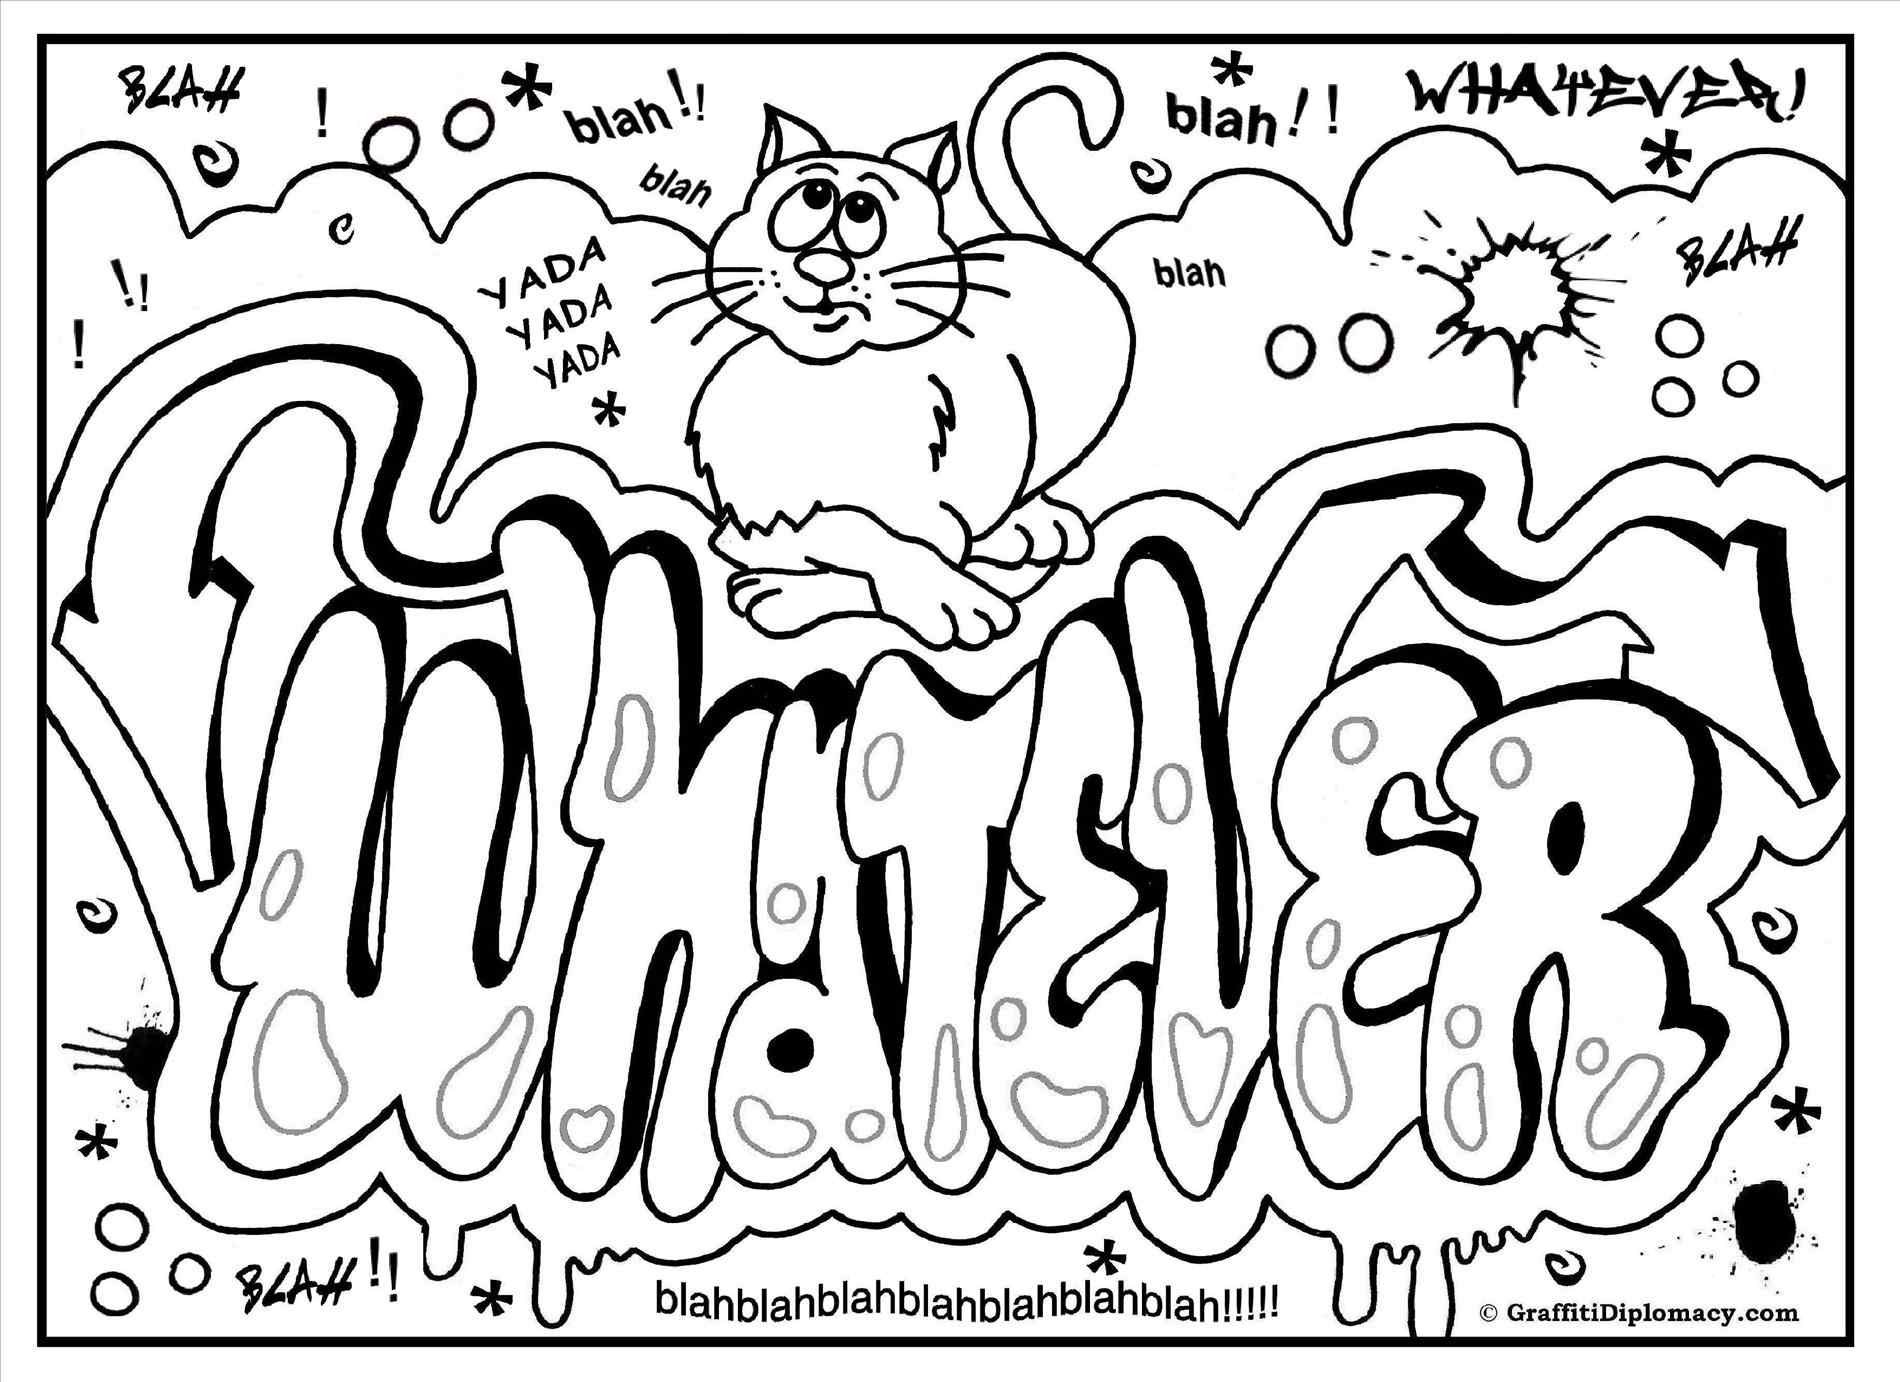 865 Cute Bubble Letter Name Coloring Pages for Kindergarten